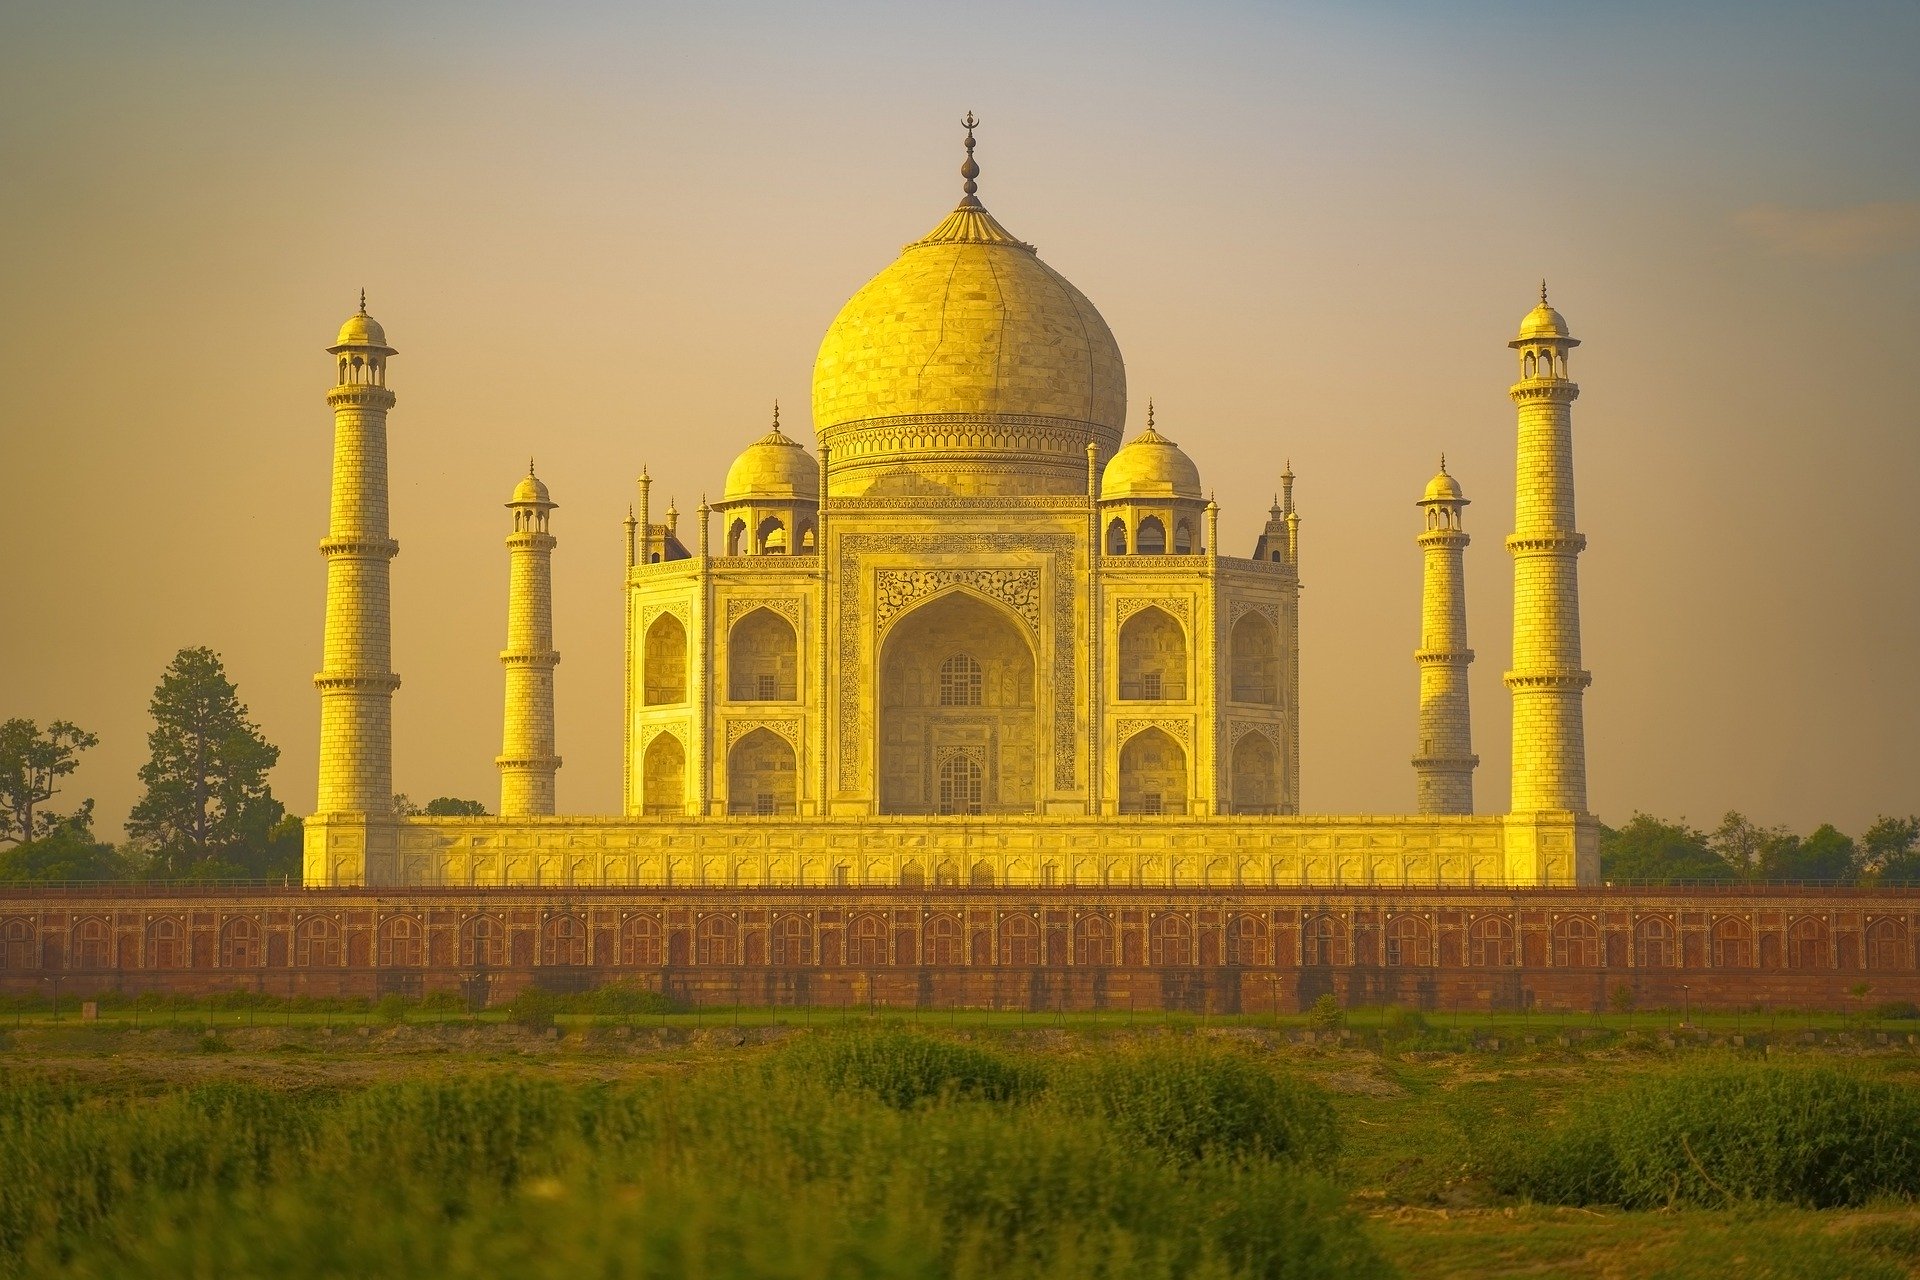 Agra in 72 hours- It’s not just about the Taj